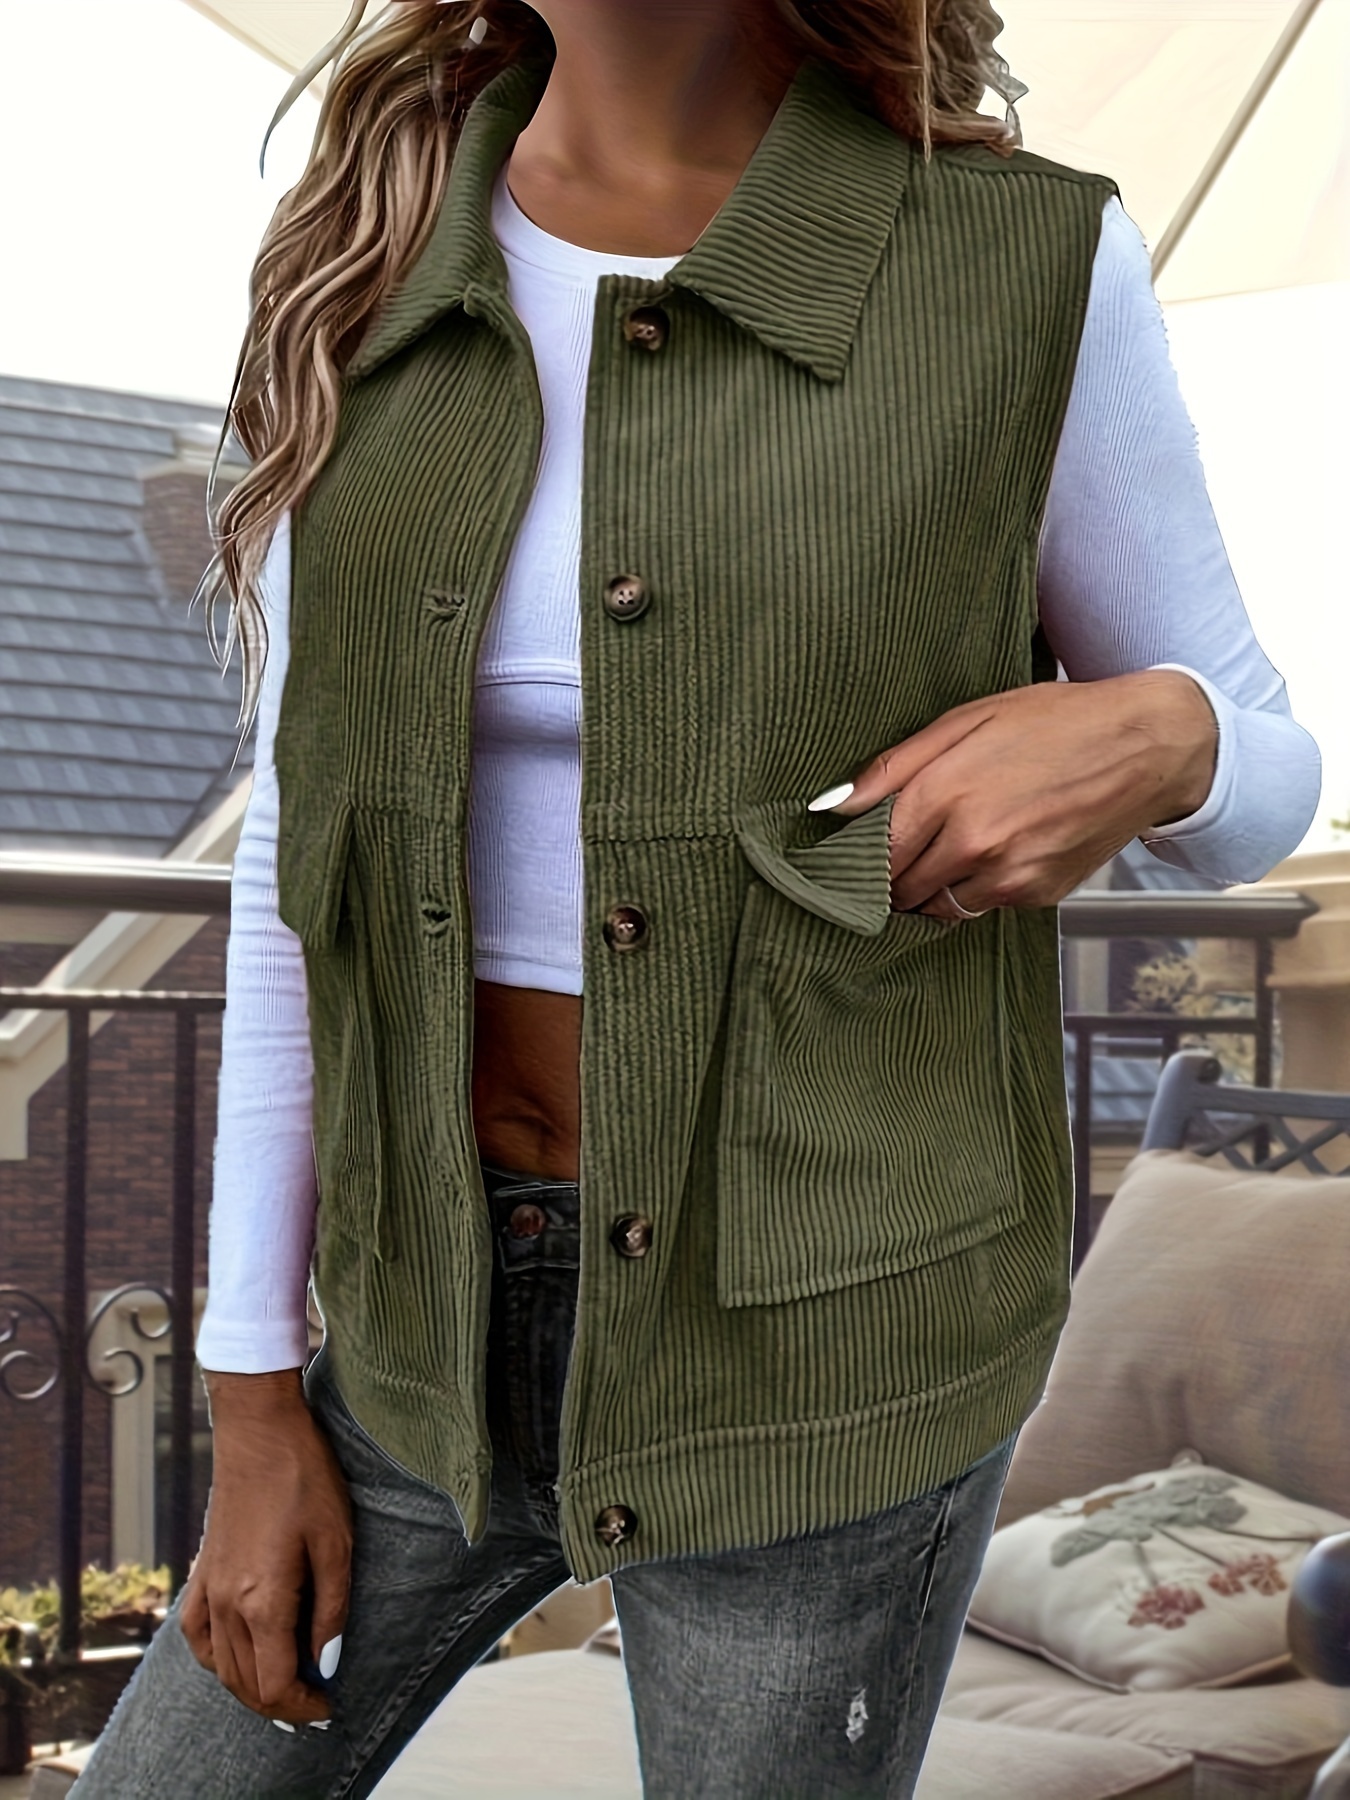 Chaleco Verde  Classy fall outfits, Fall outfits, Fashion